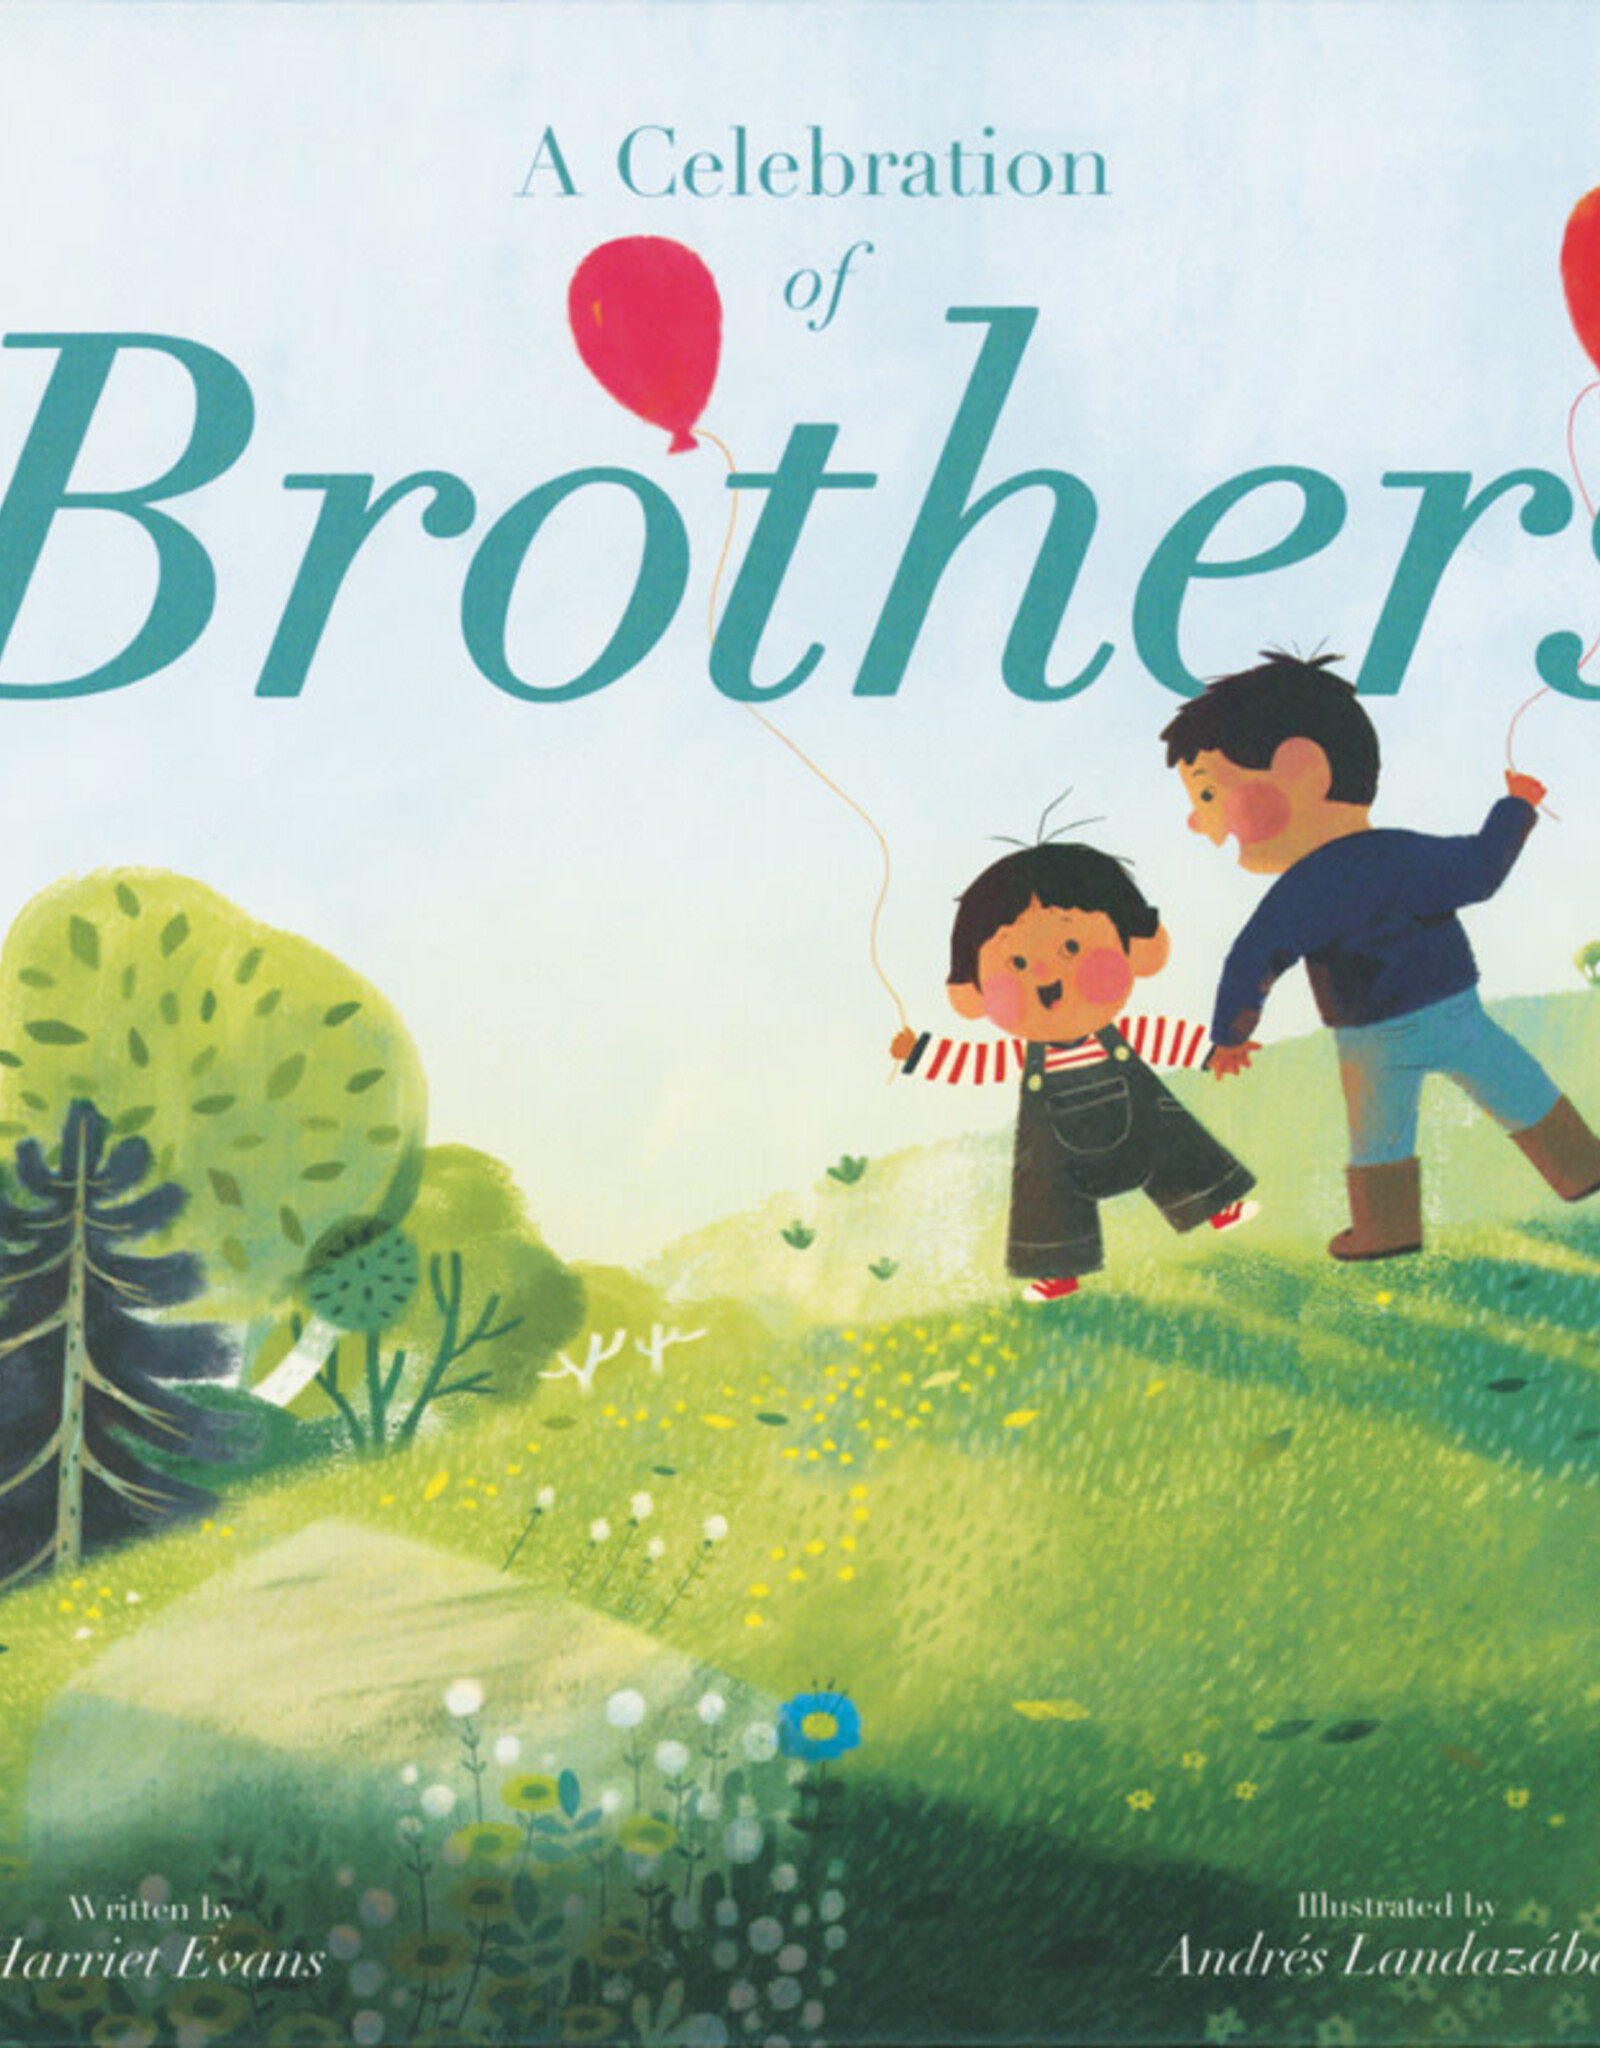 EDC A Celebration of Brothers by Harriet Evans